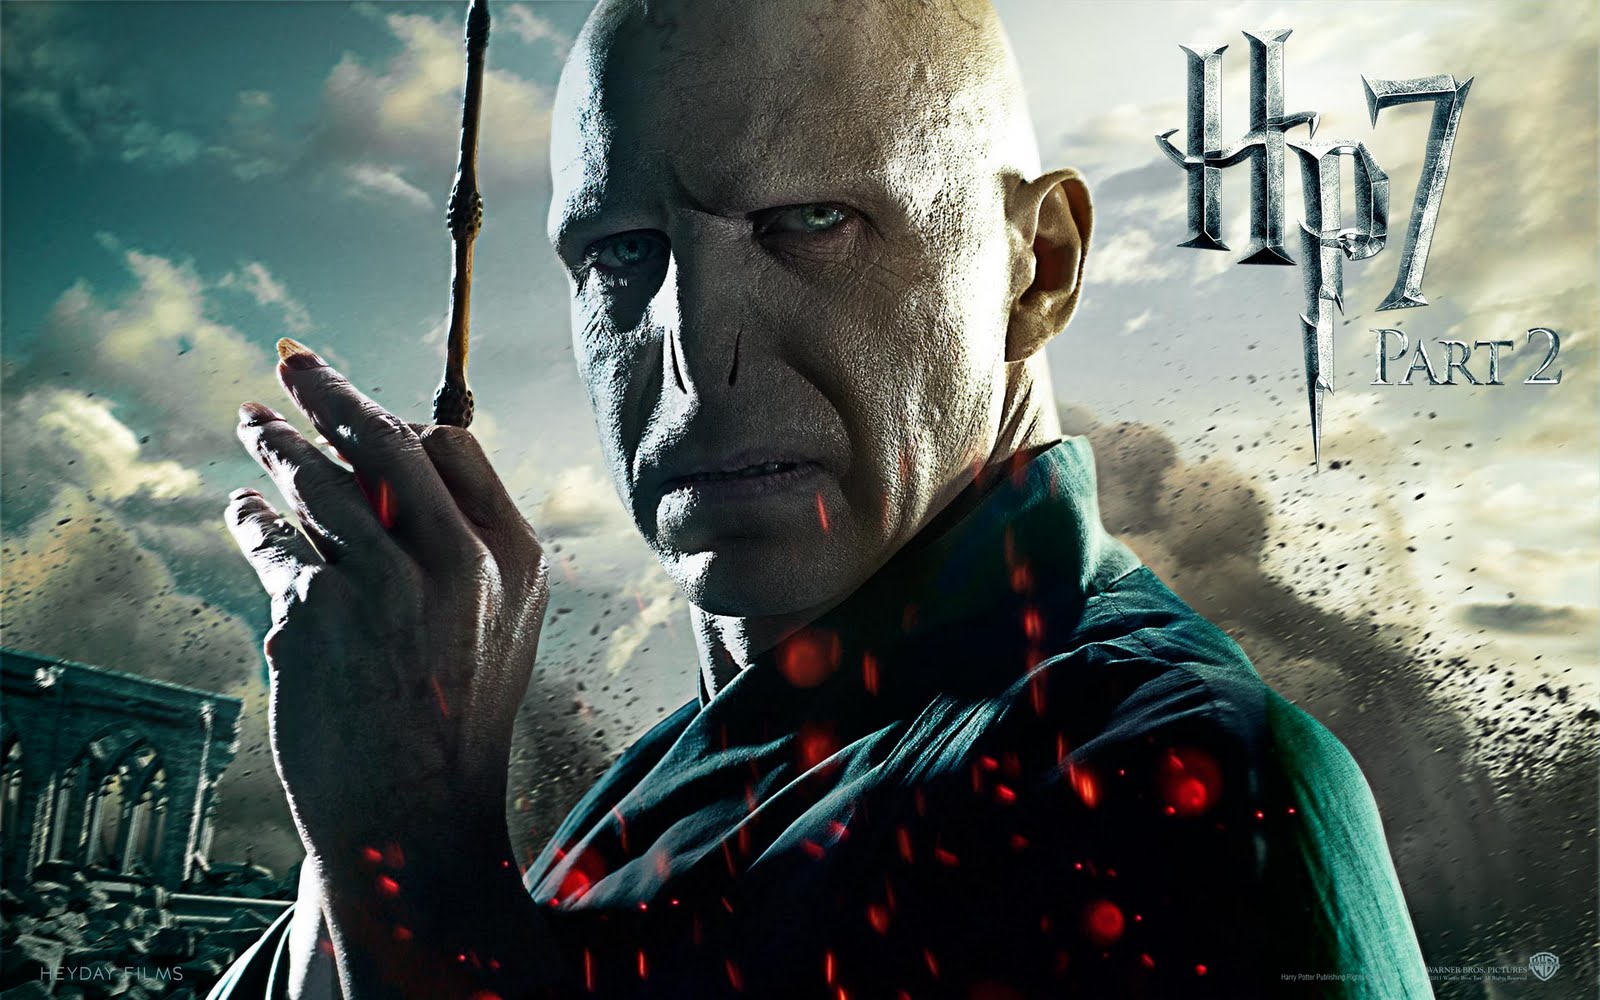 harry potter in deathly hallows part 2 download free